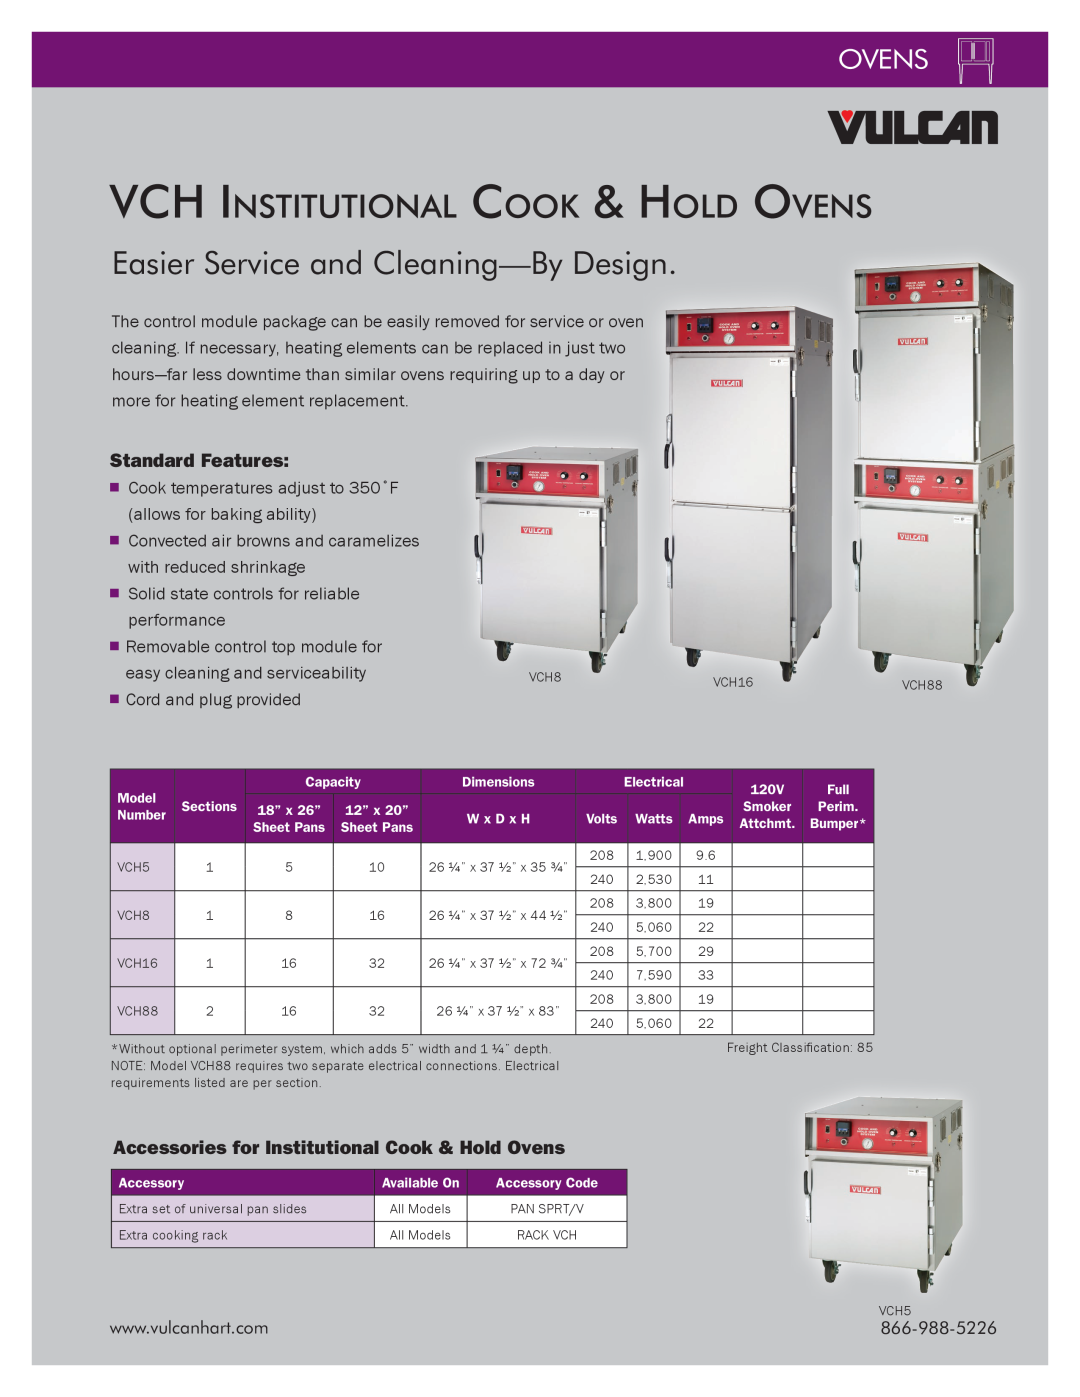 Vulcan-Hart VCH8 dimensions VCH Institutional Cook & Hold Ovens, Easier Service and Cleaning-ByDesign, Standard Features 